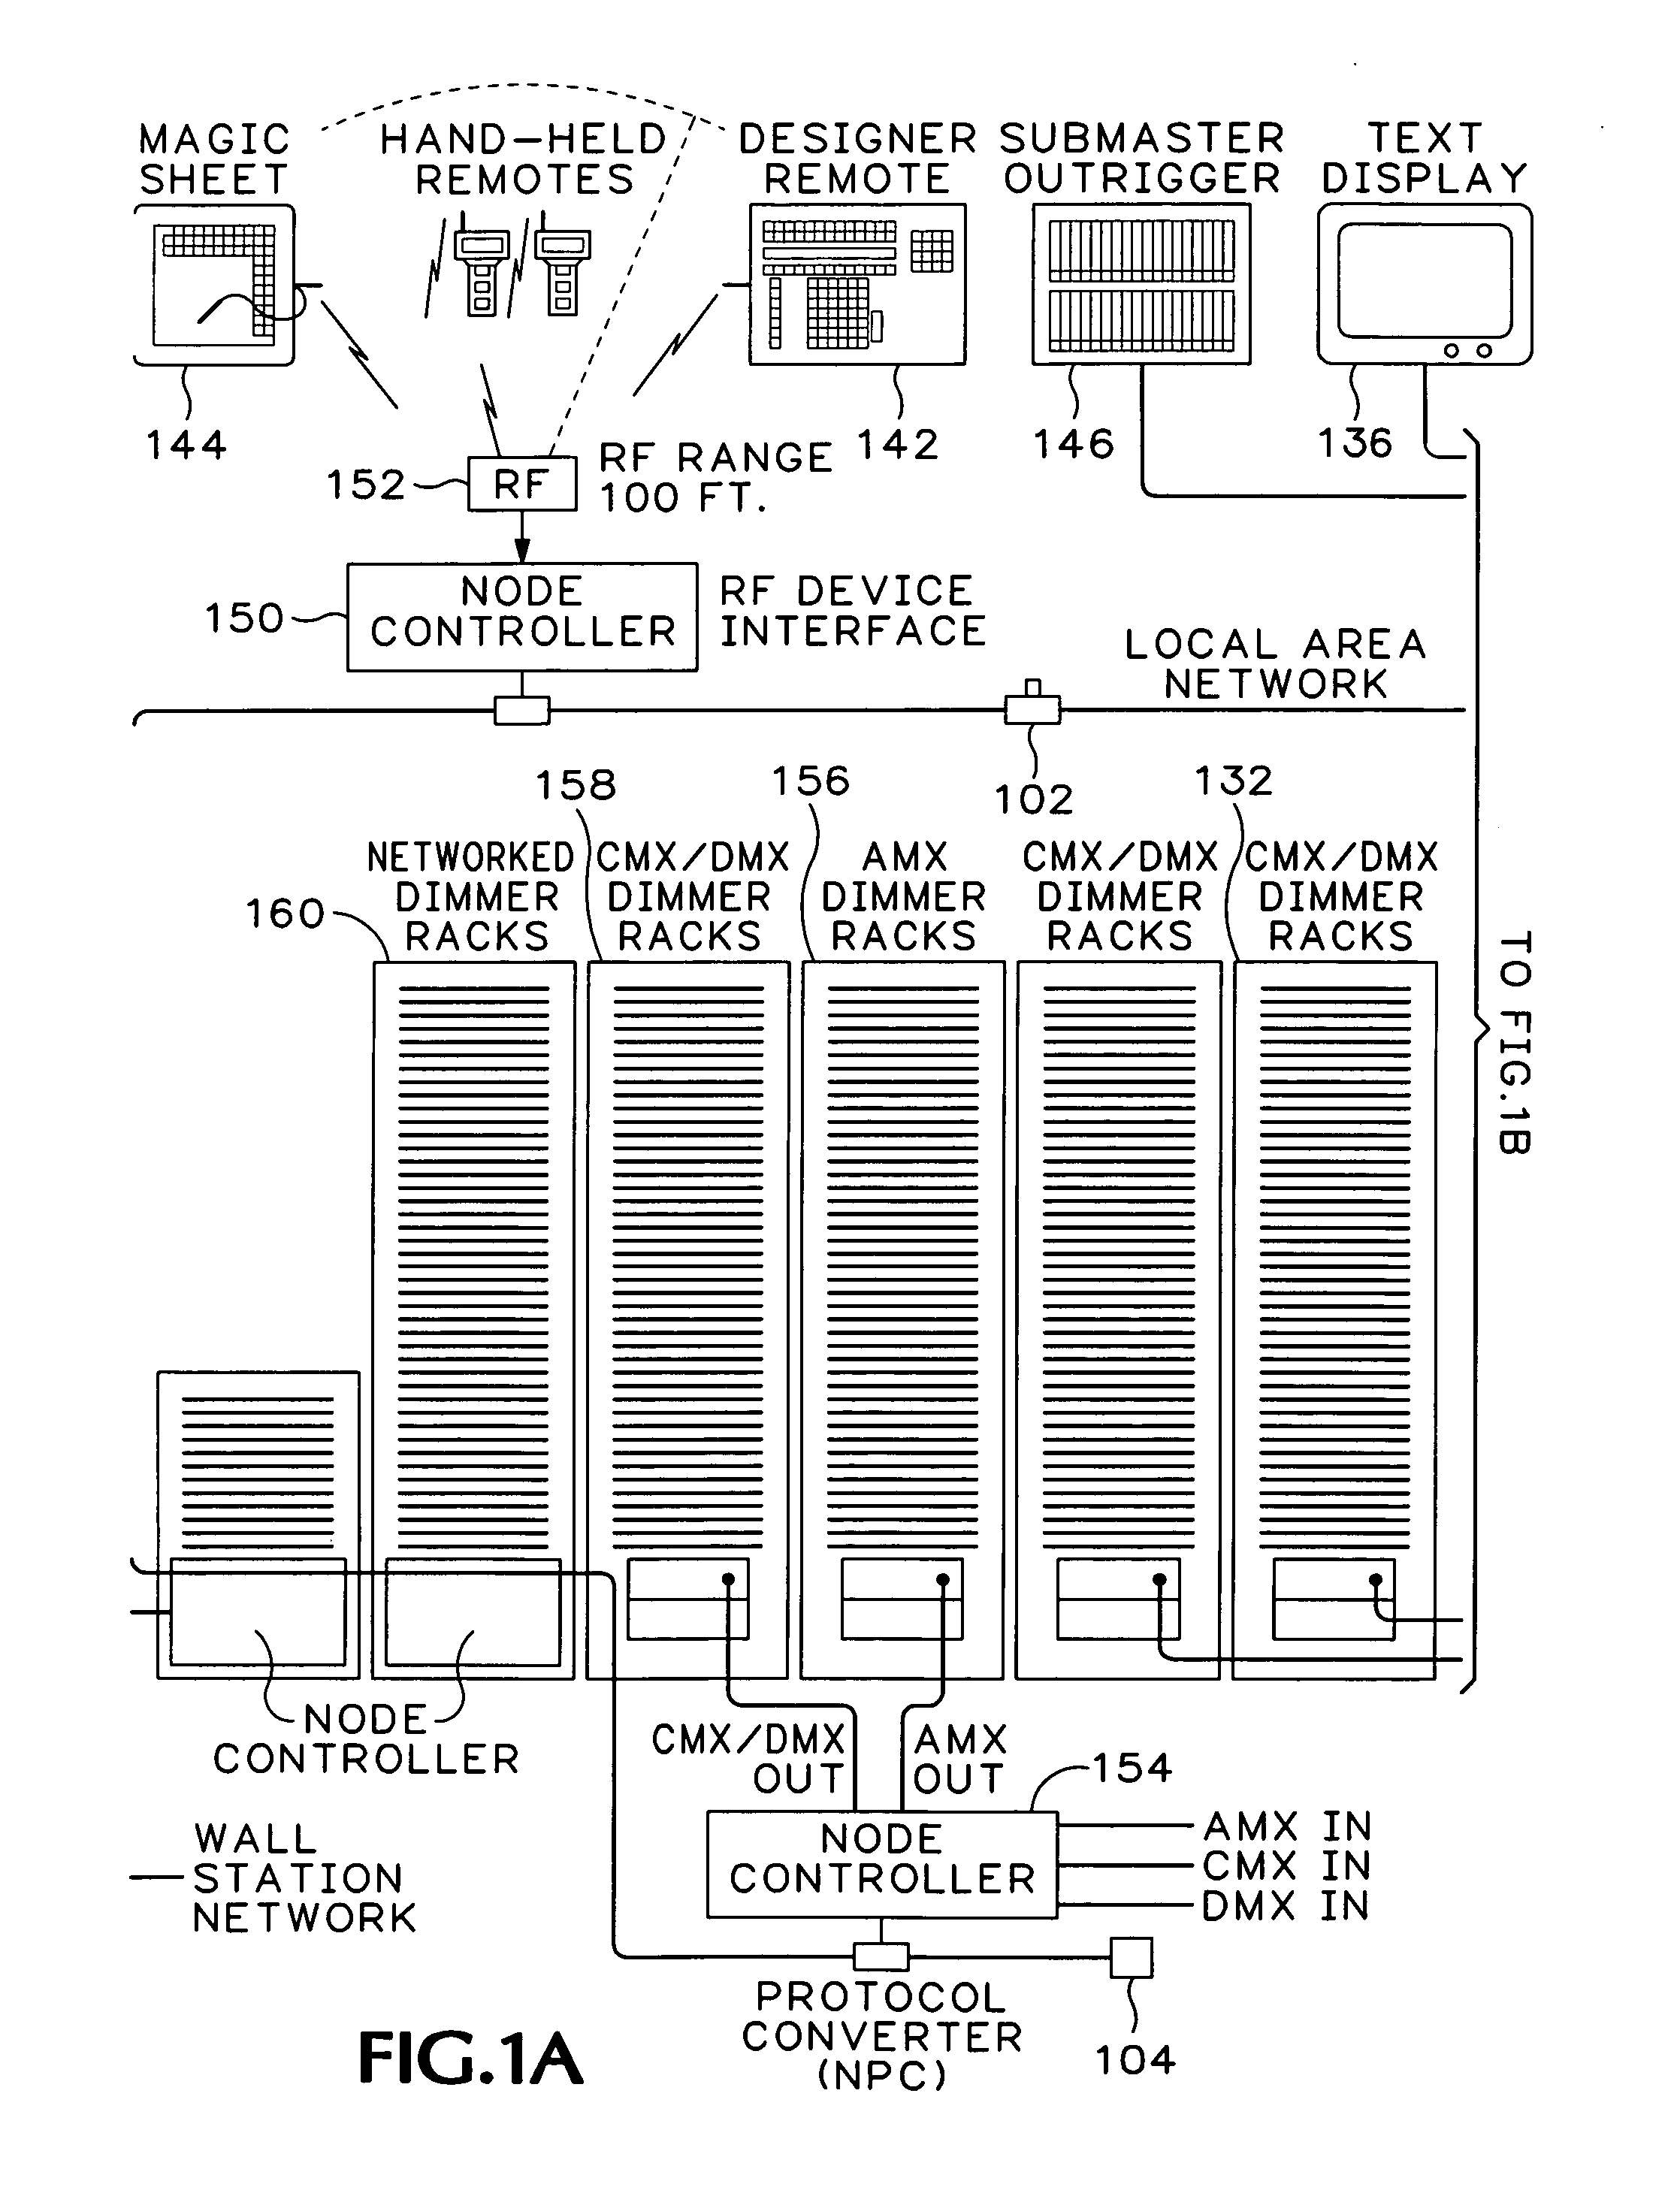 Theatrical lighting control network